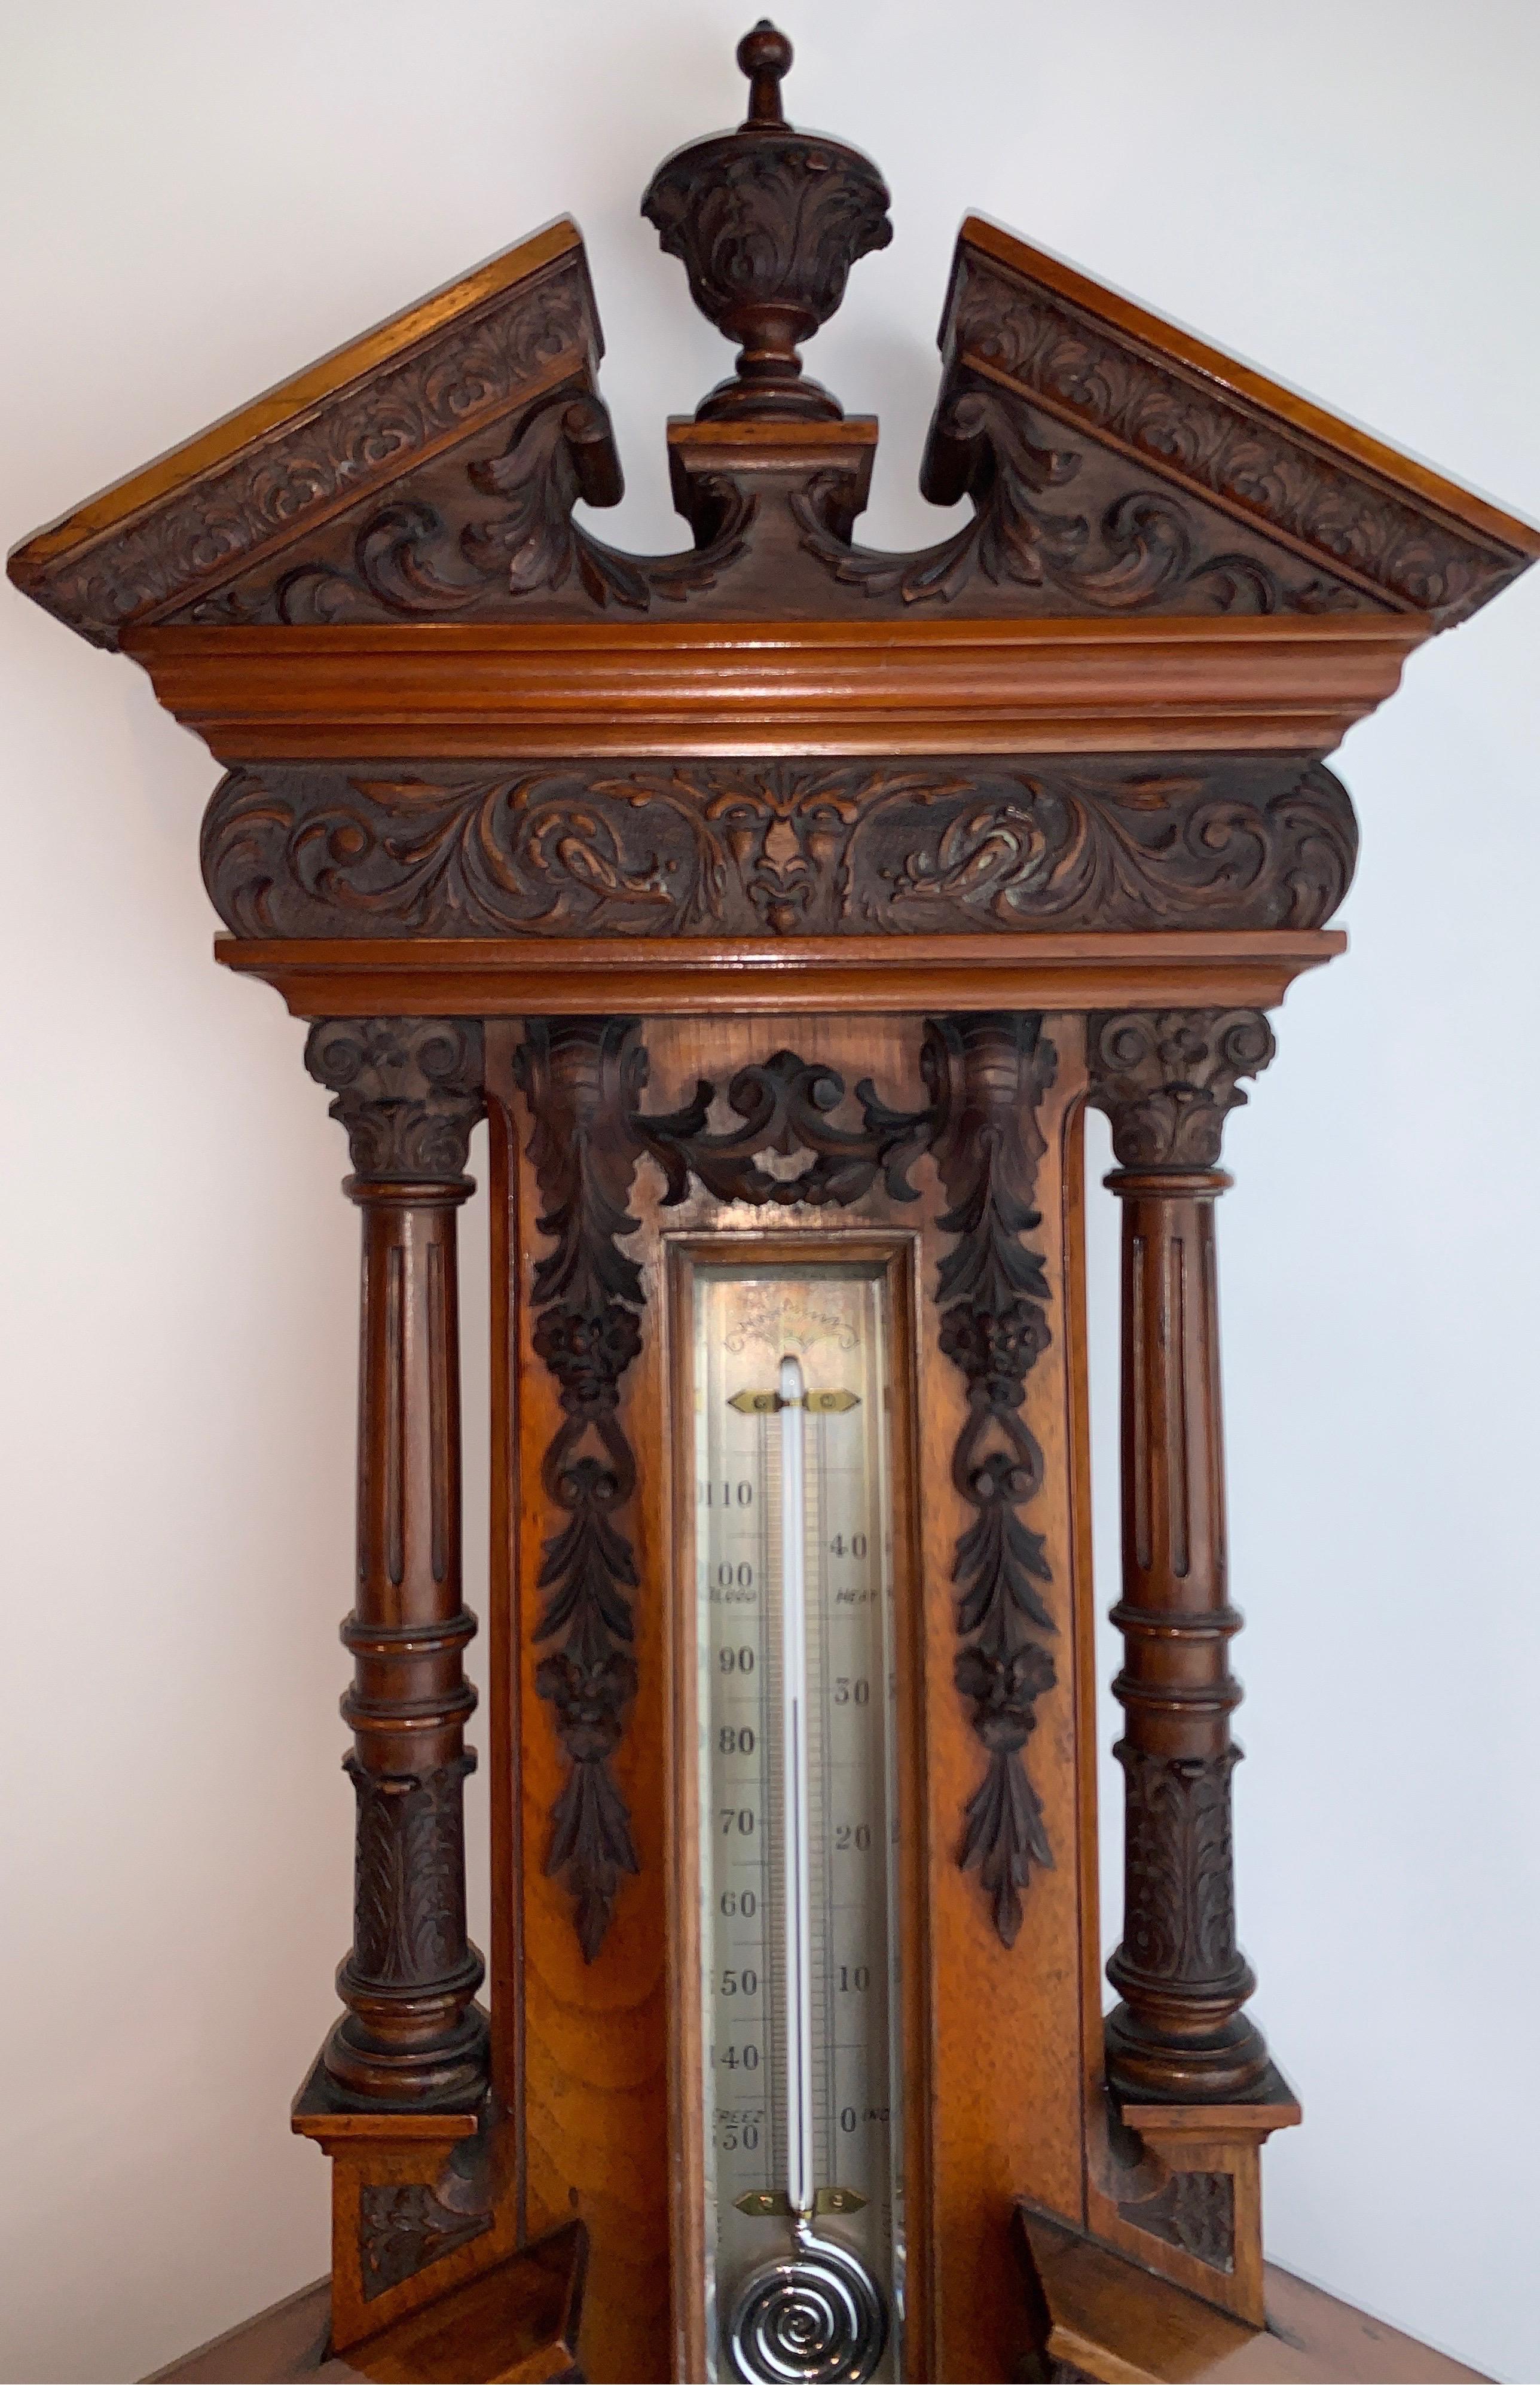 Well carved English mahogany barometer. In working condition. Presentation plaque dated 1898, Glassow. Made by J. White.